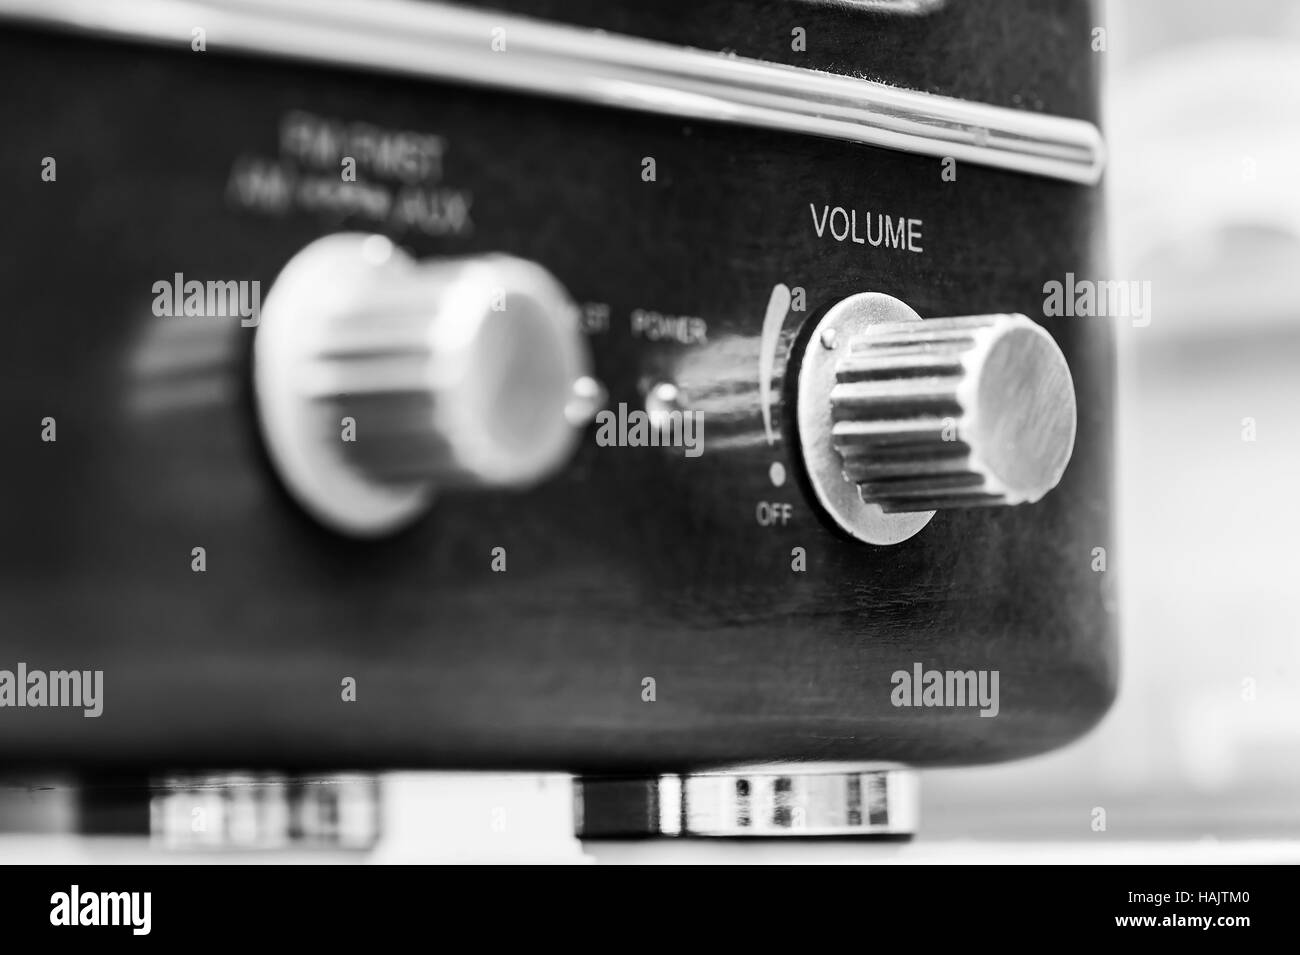 Old analog radio reciever with knobs. Stock Photo